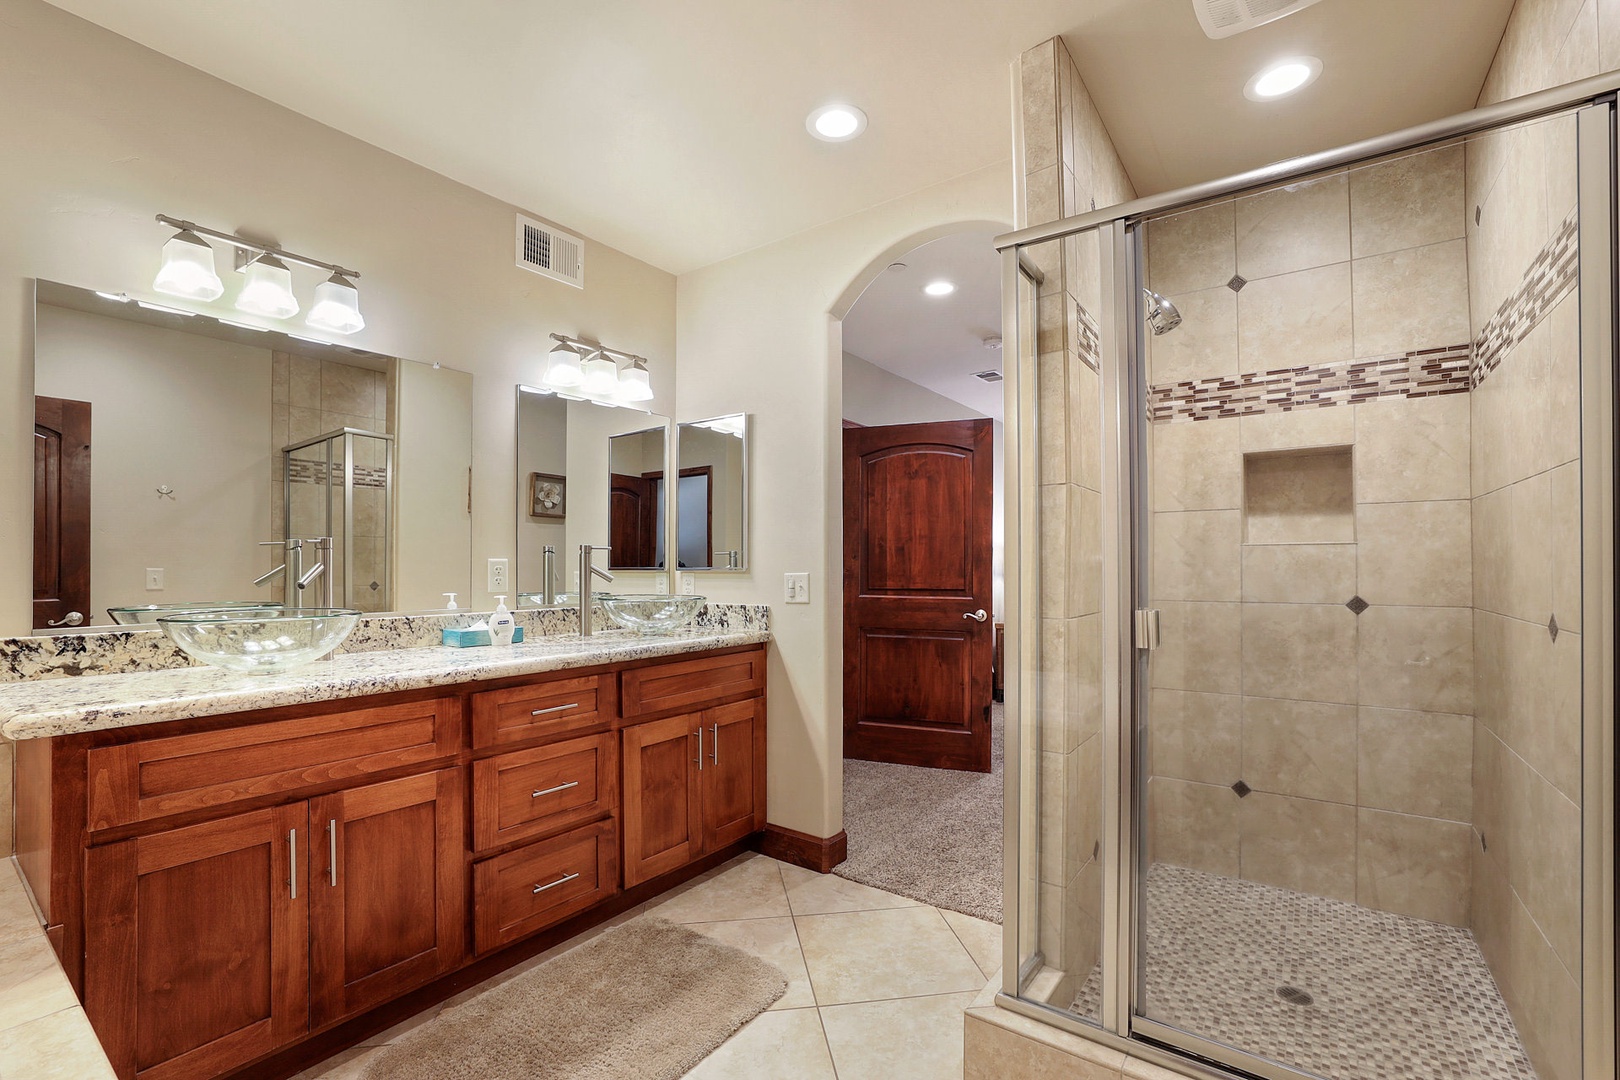 Master bathroom: large with double sinks